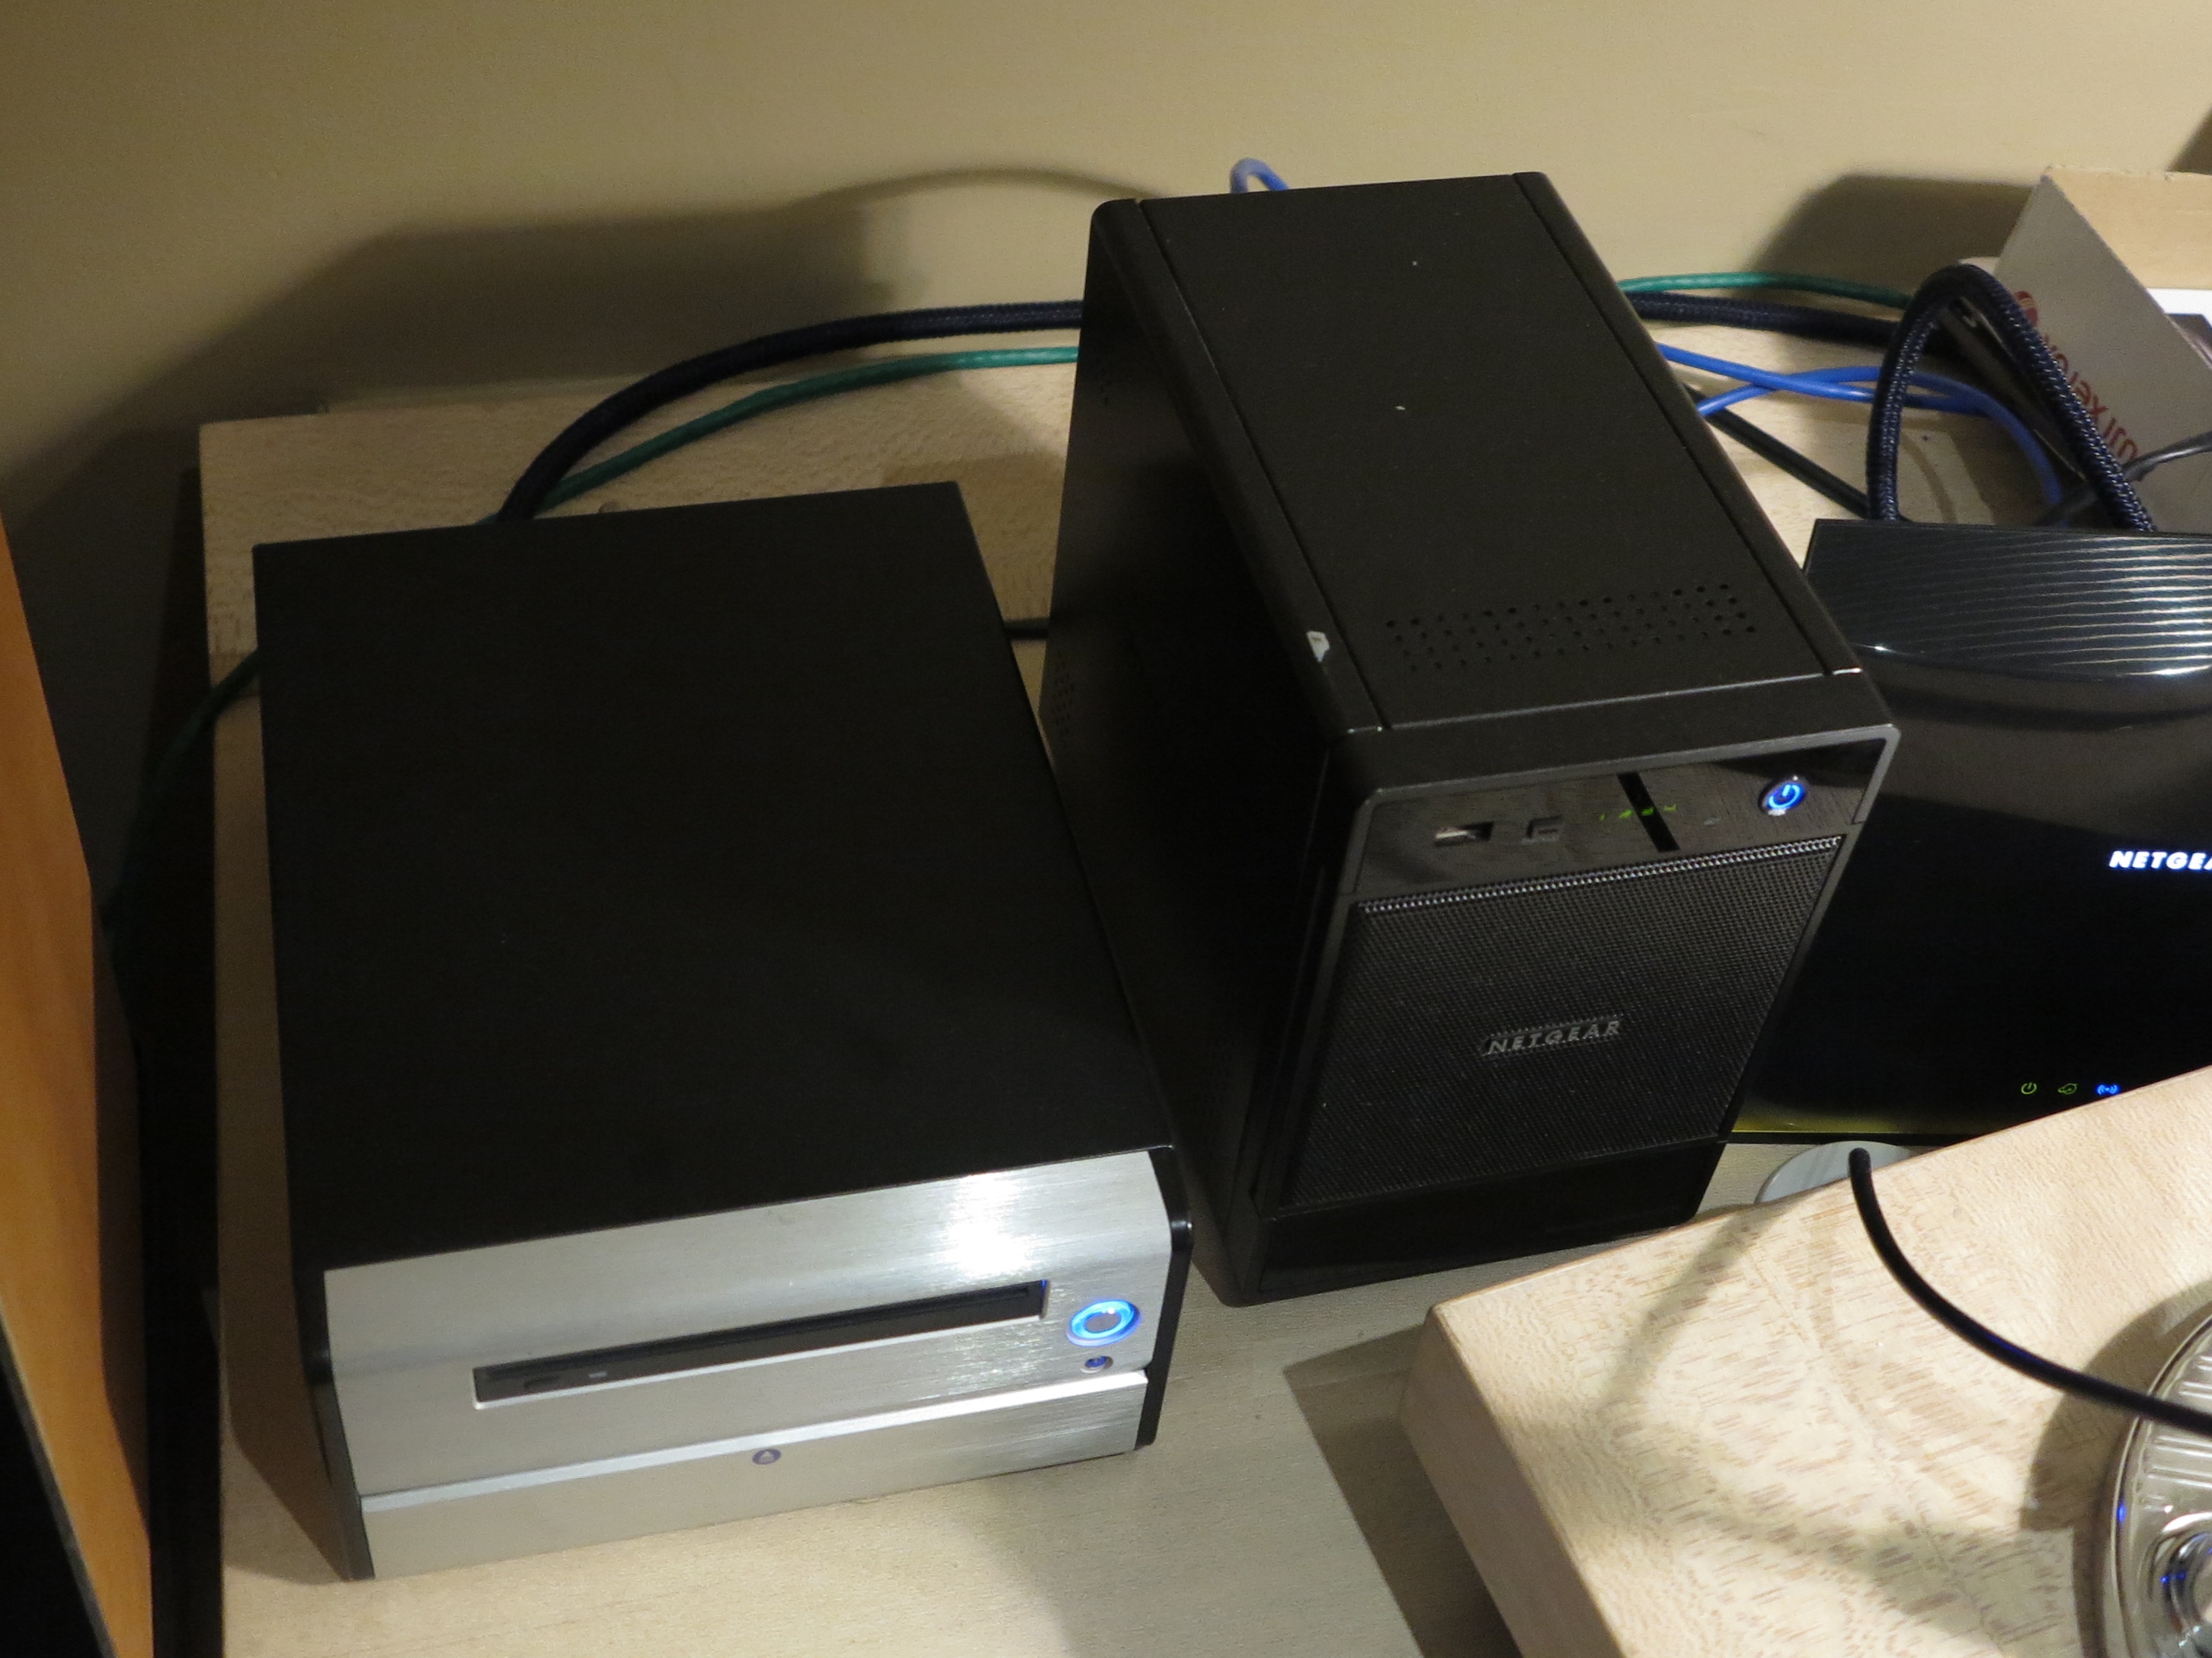 Hardware video transcoding to be a feature for NAS units